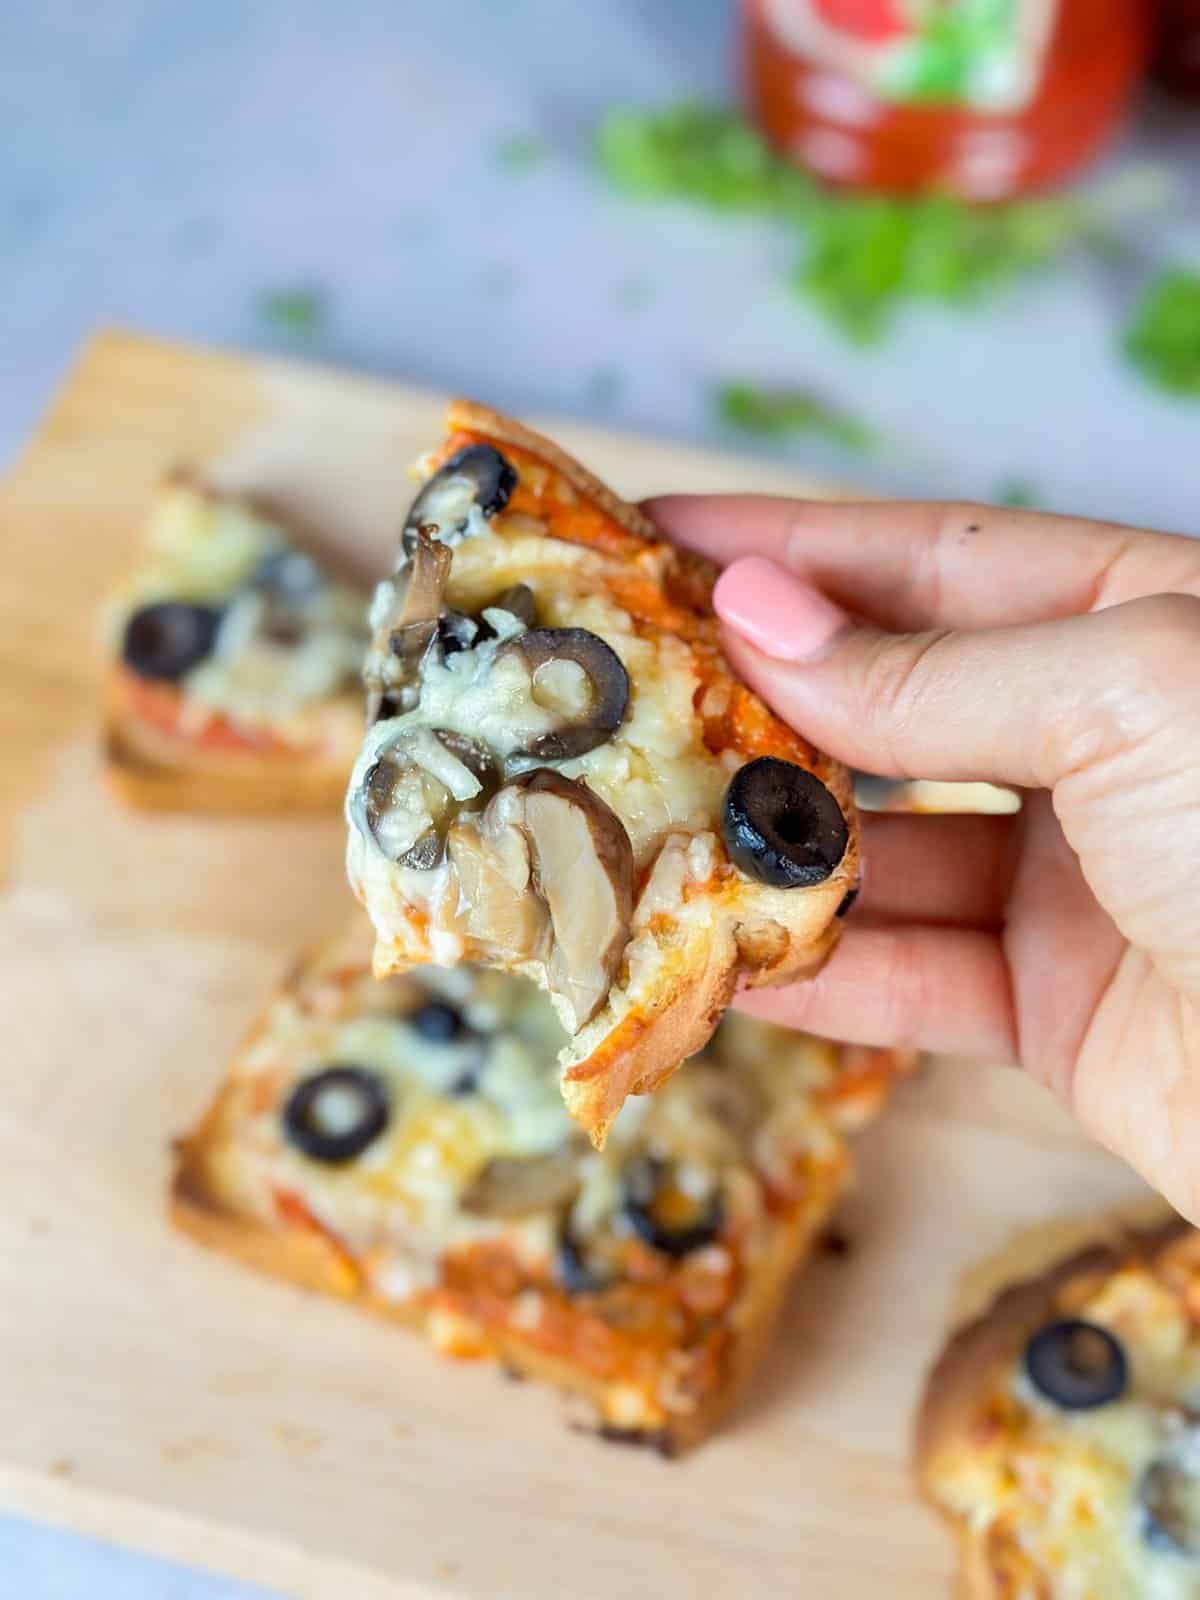 a hand holding a piece of delicious pizza toast with a soft, chewy interior and a delicate, crispy exterior